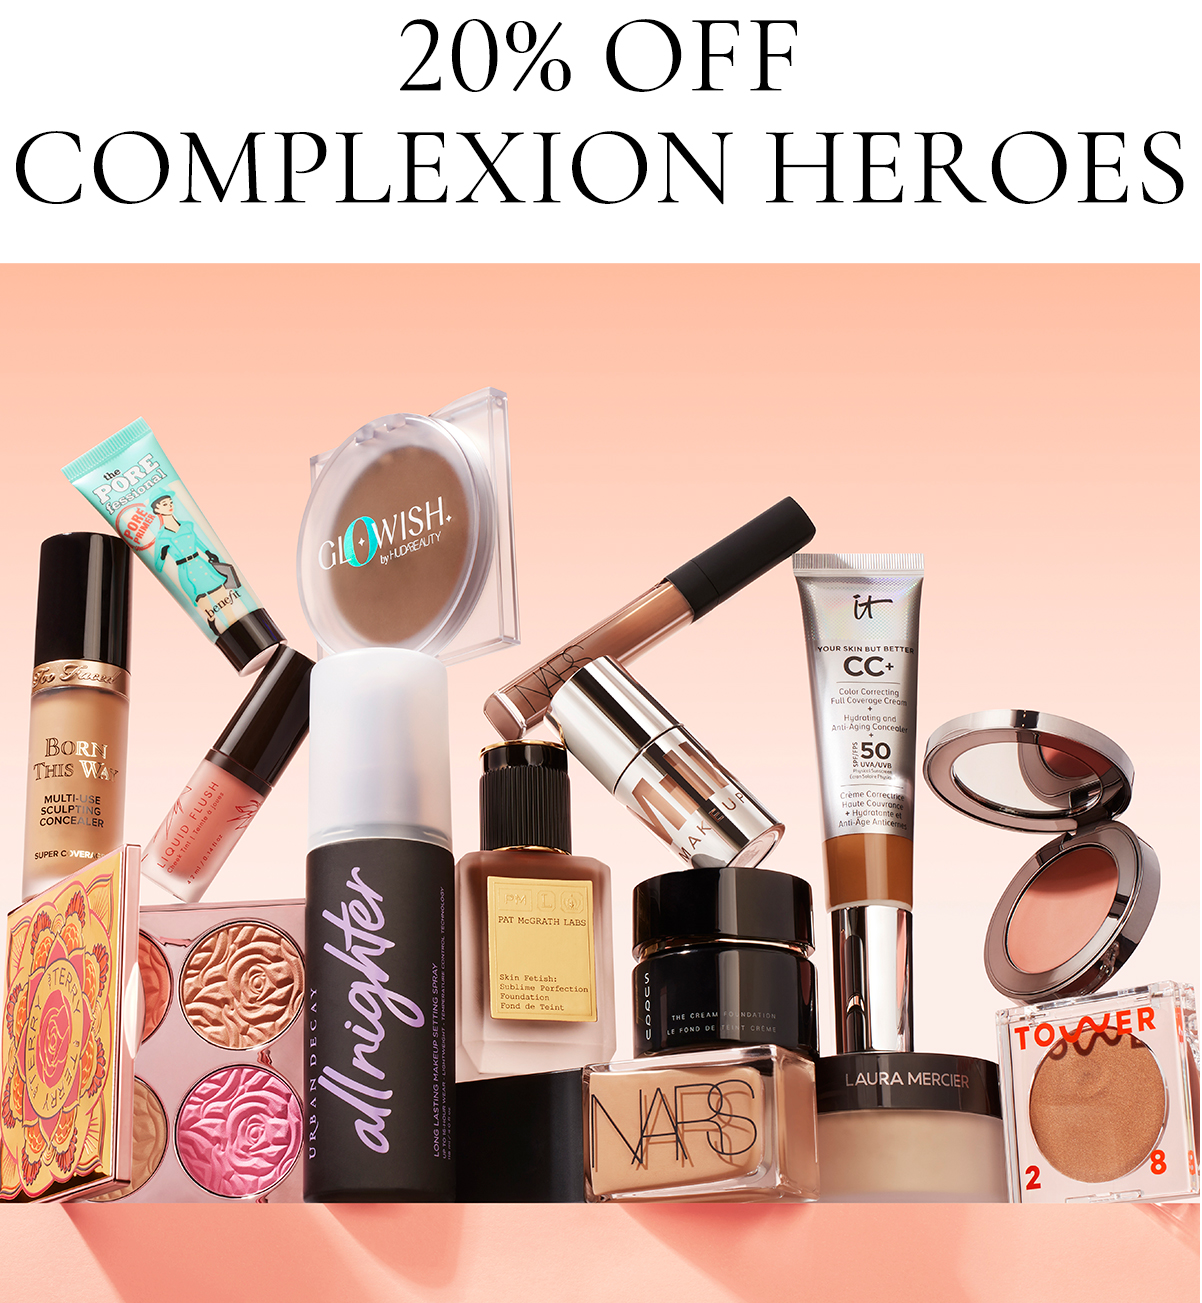 20% OFF COMPLEXION HEROES 